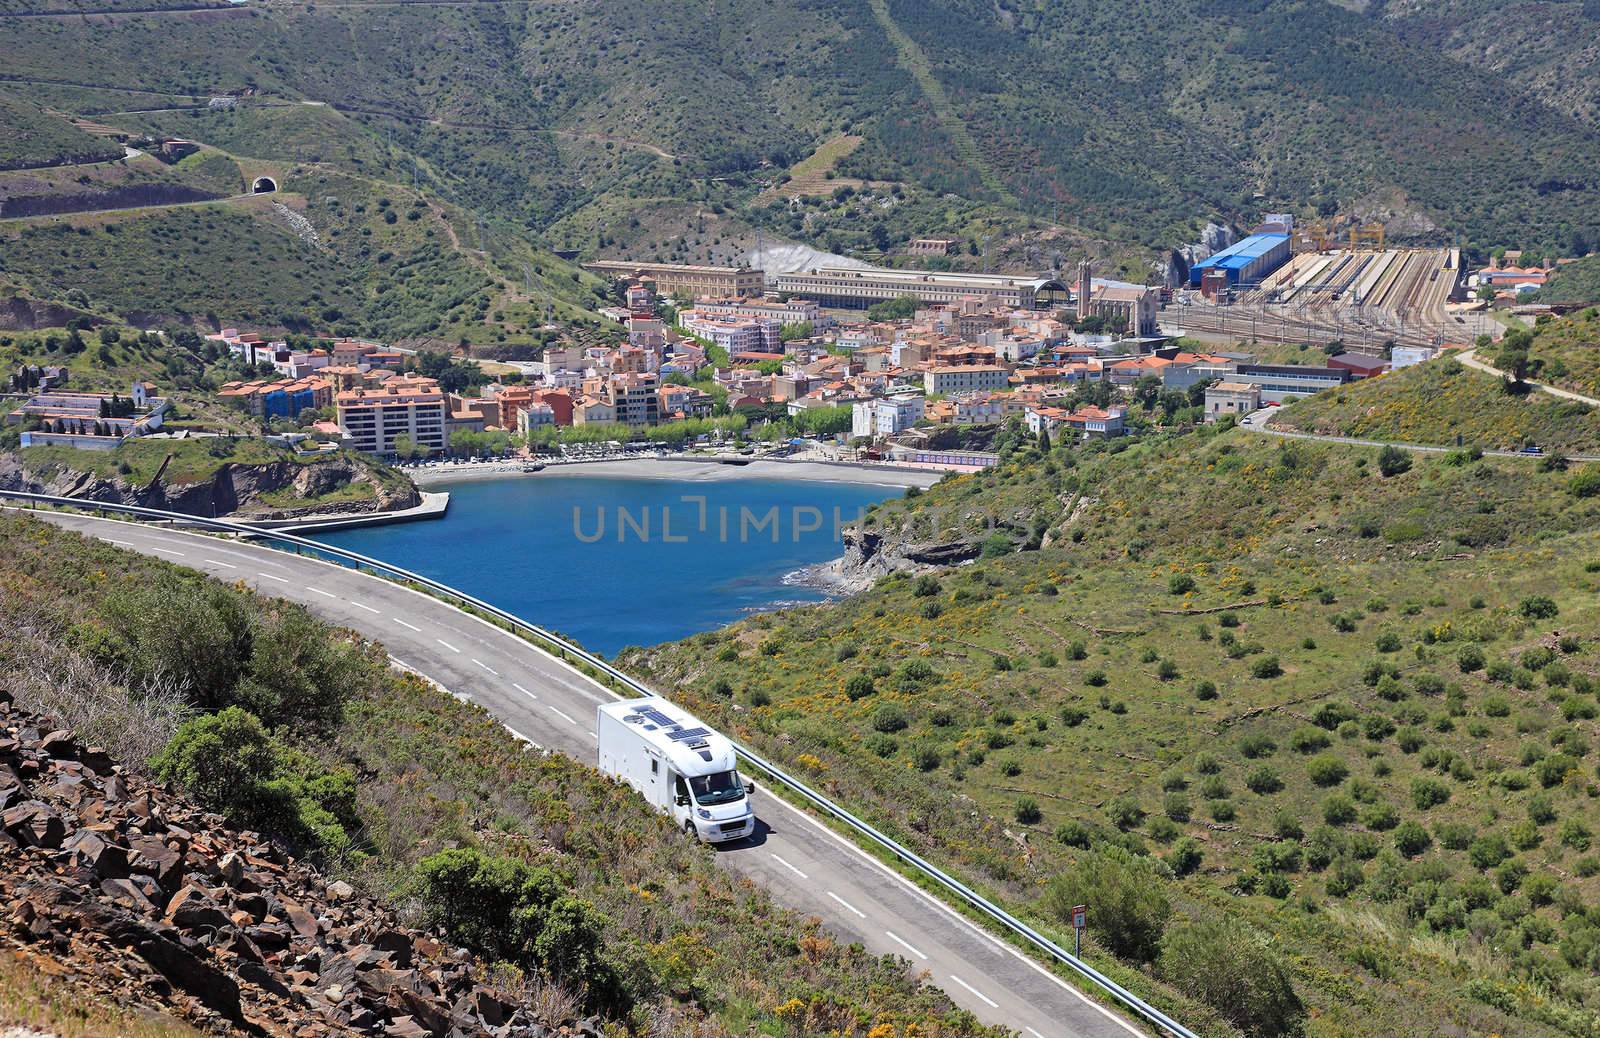 Camper on the road near spanish city Portbou, not far from border between Spain and France.